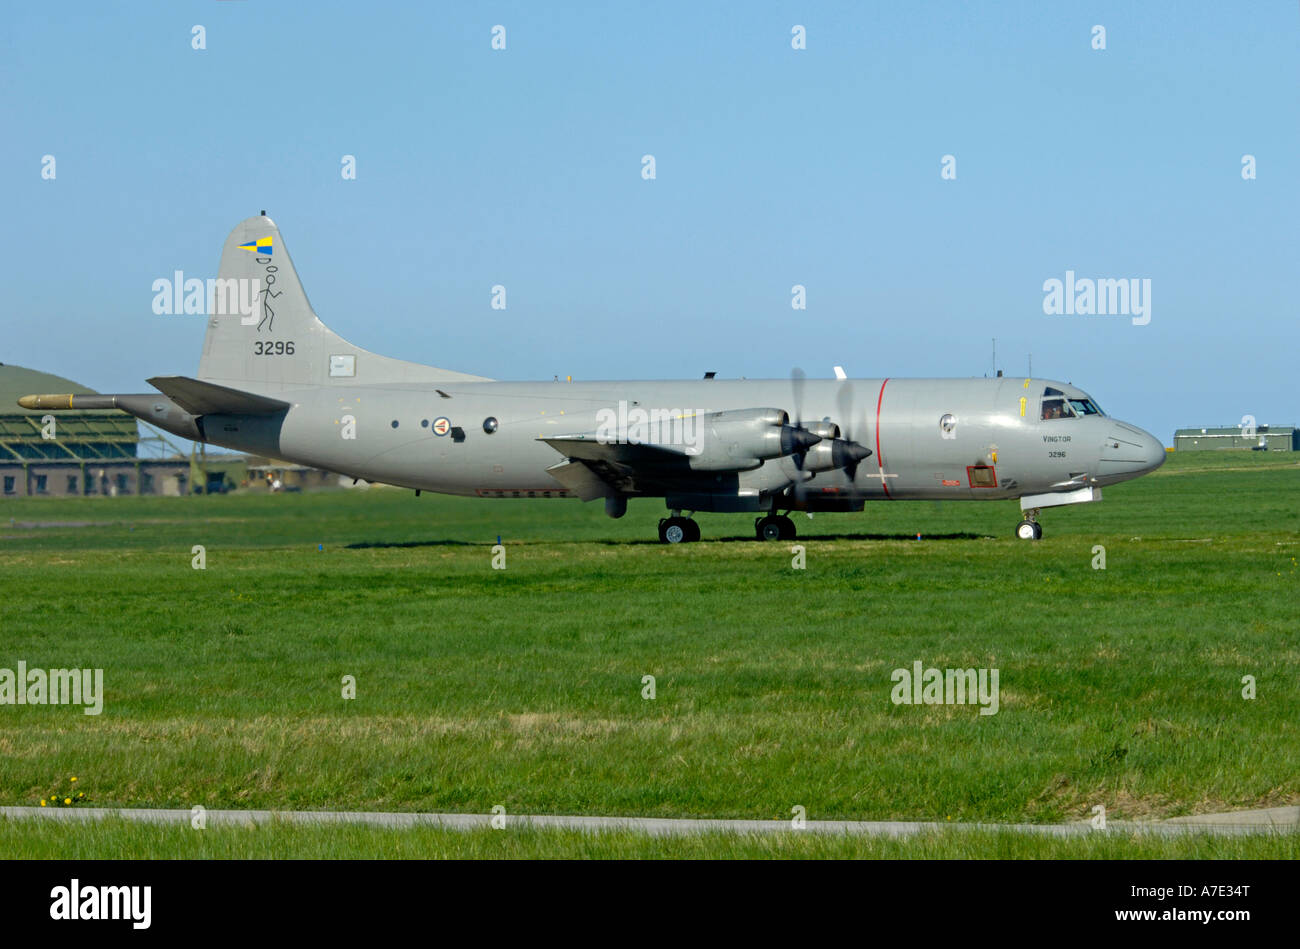 Norway - Air Force Lockheed P-3C Orion Maritime Patrol Aircraft Stock Photo